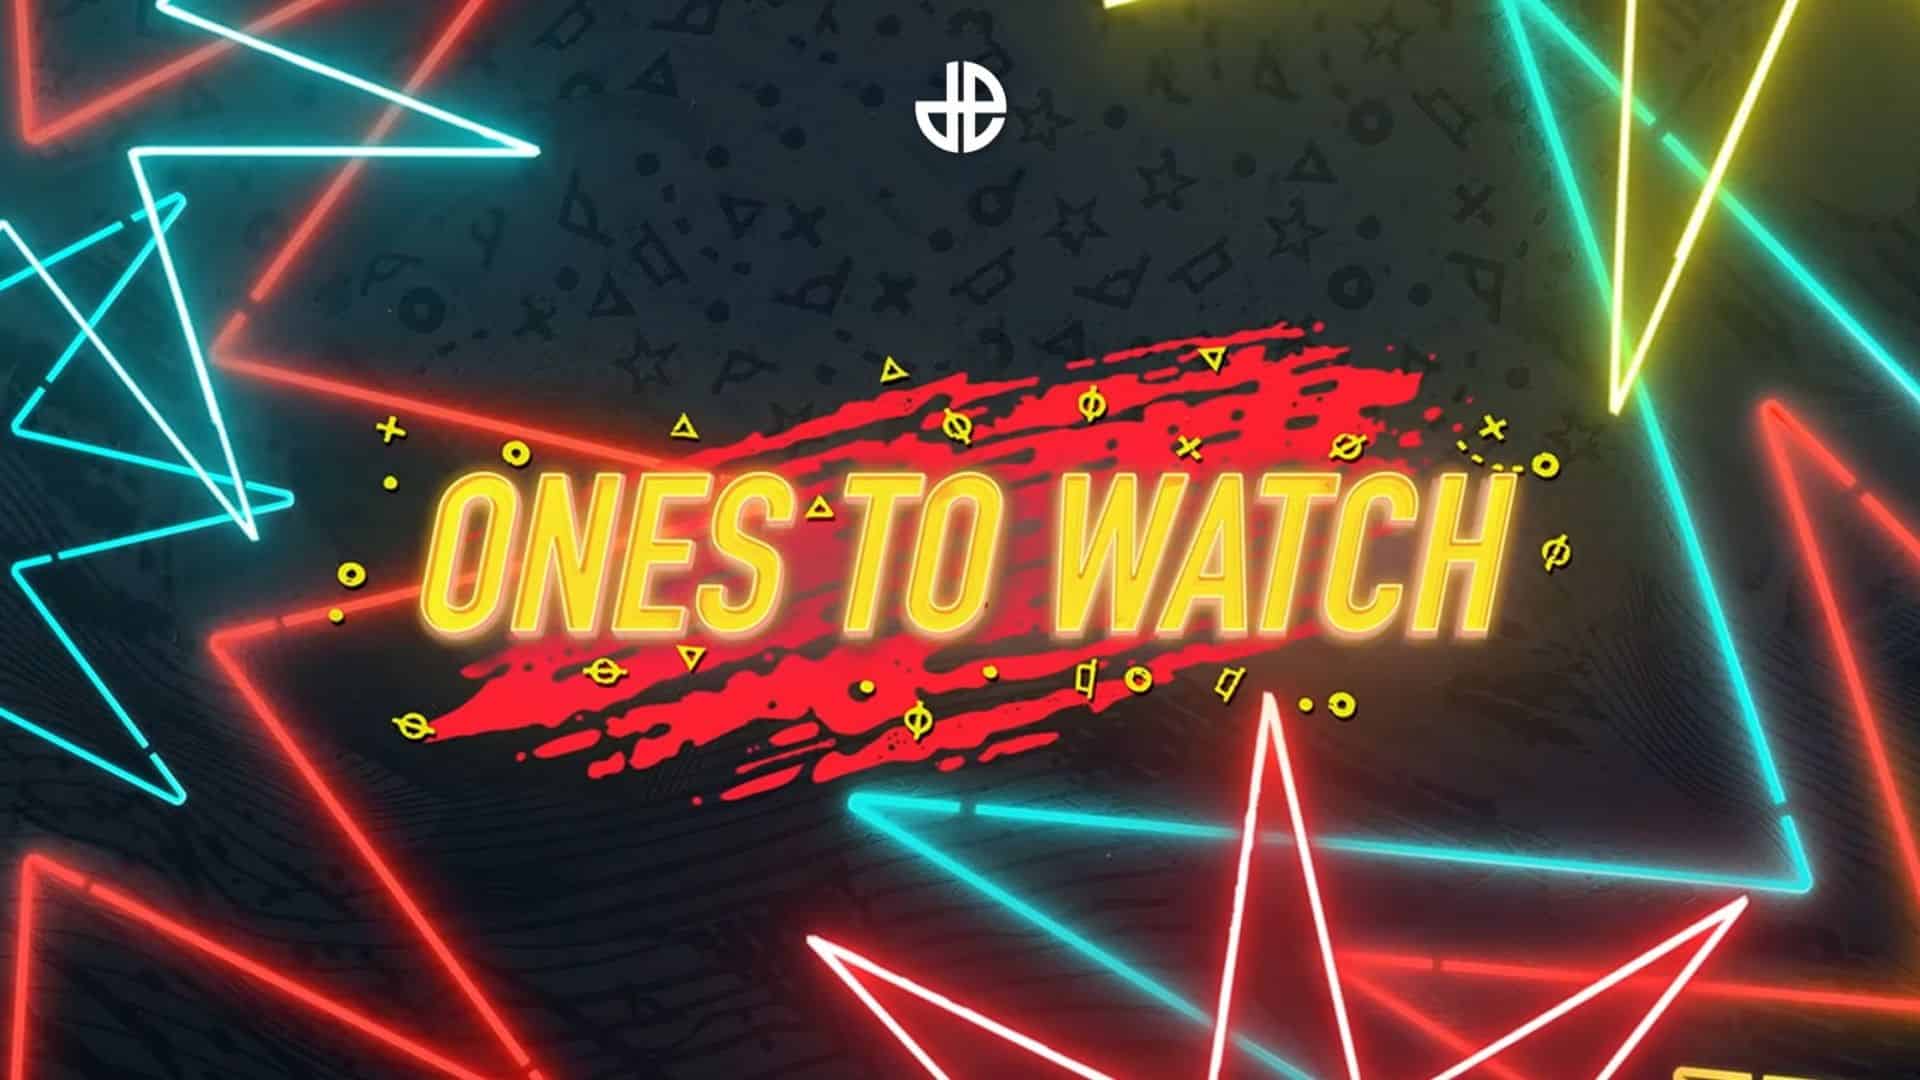 Ones to watch graphic